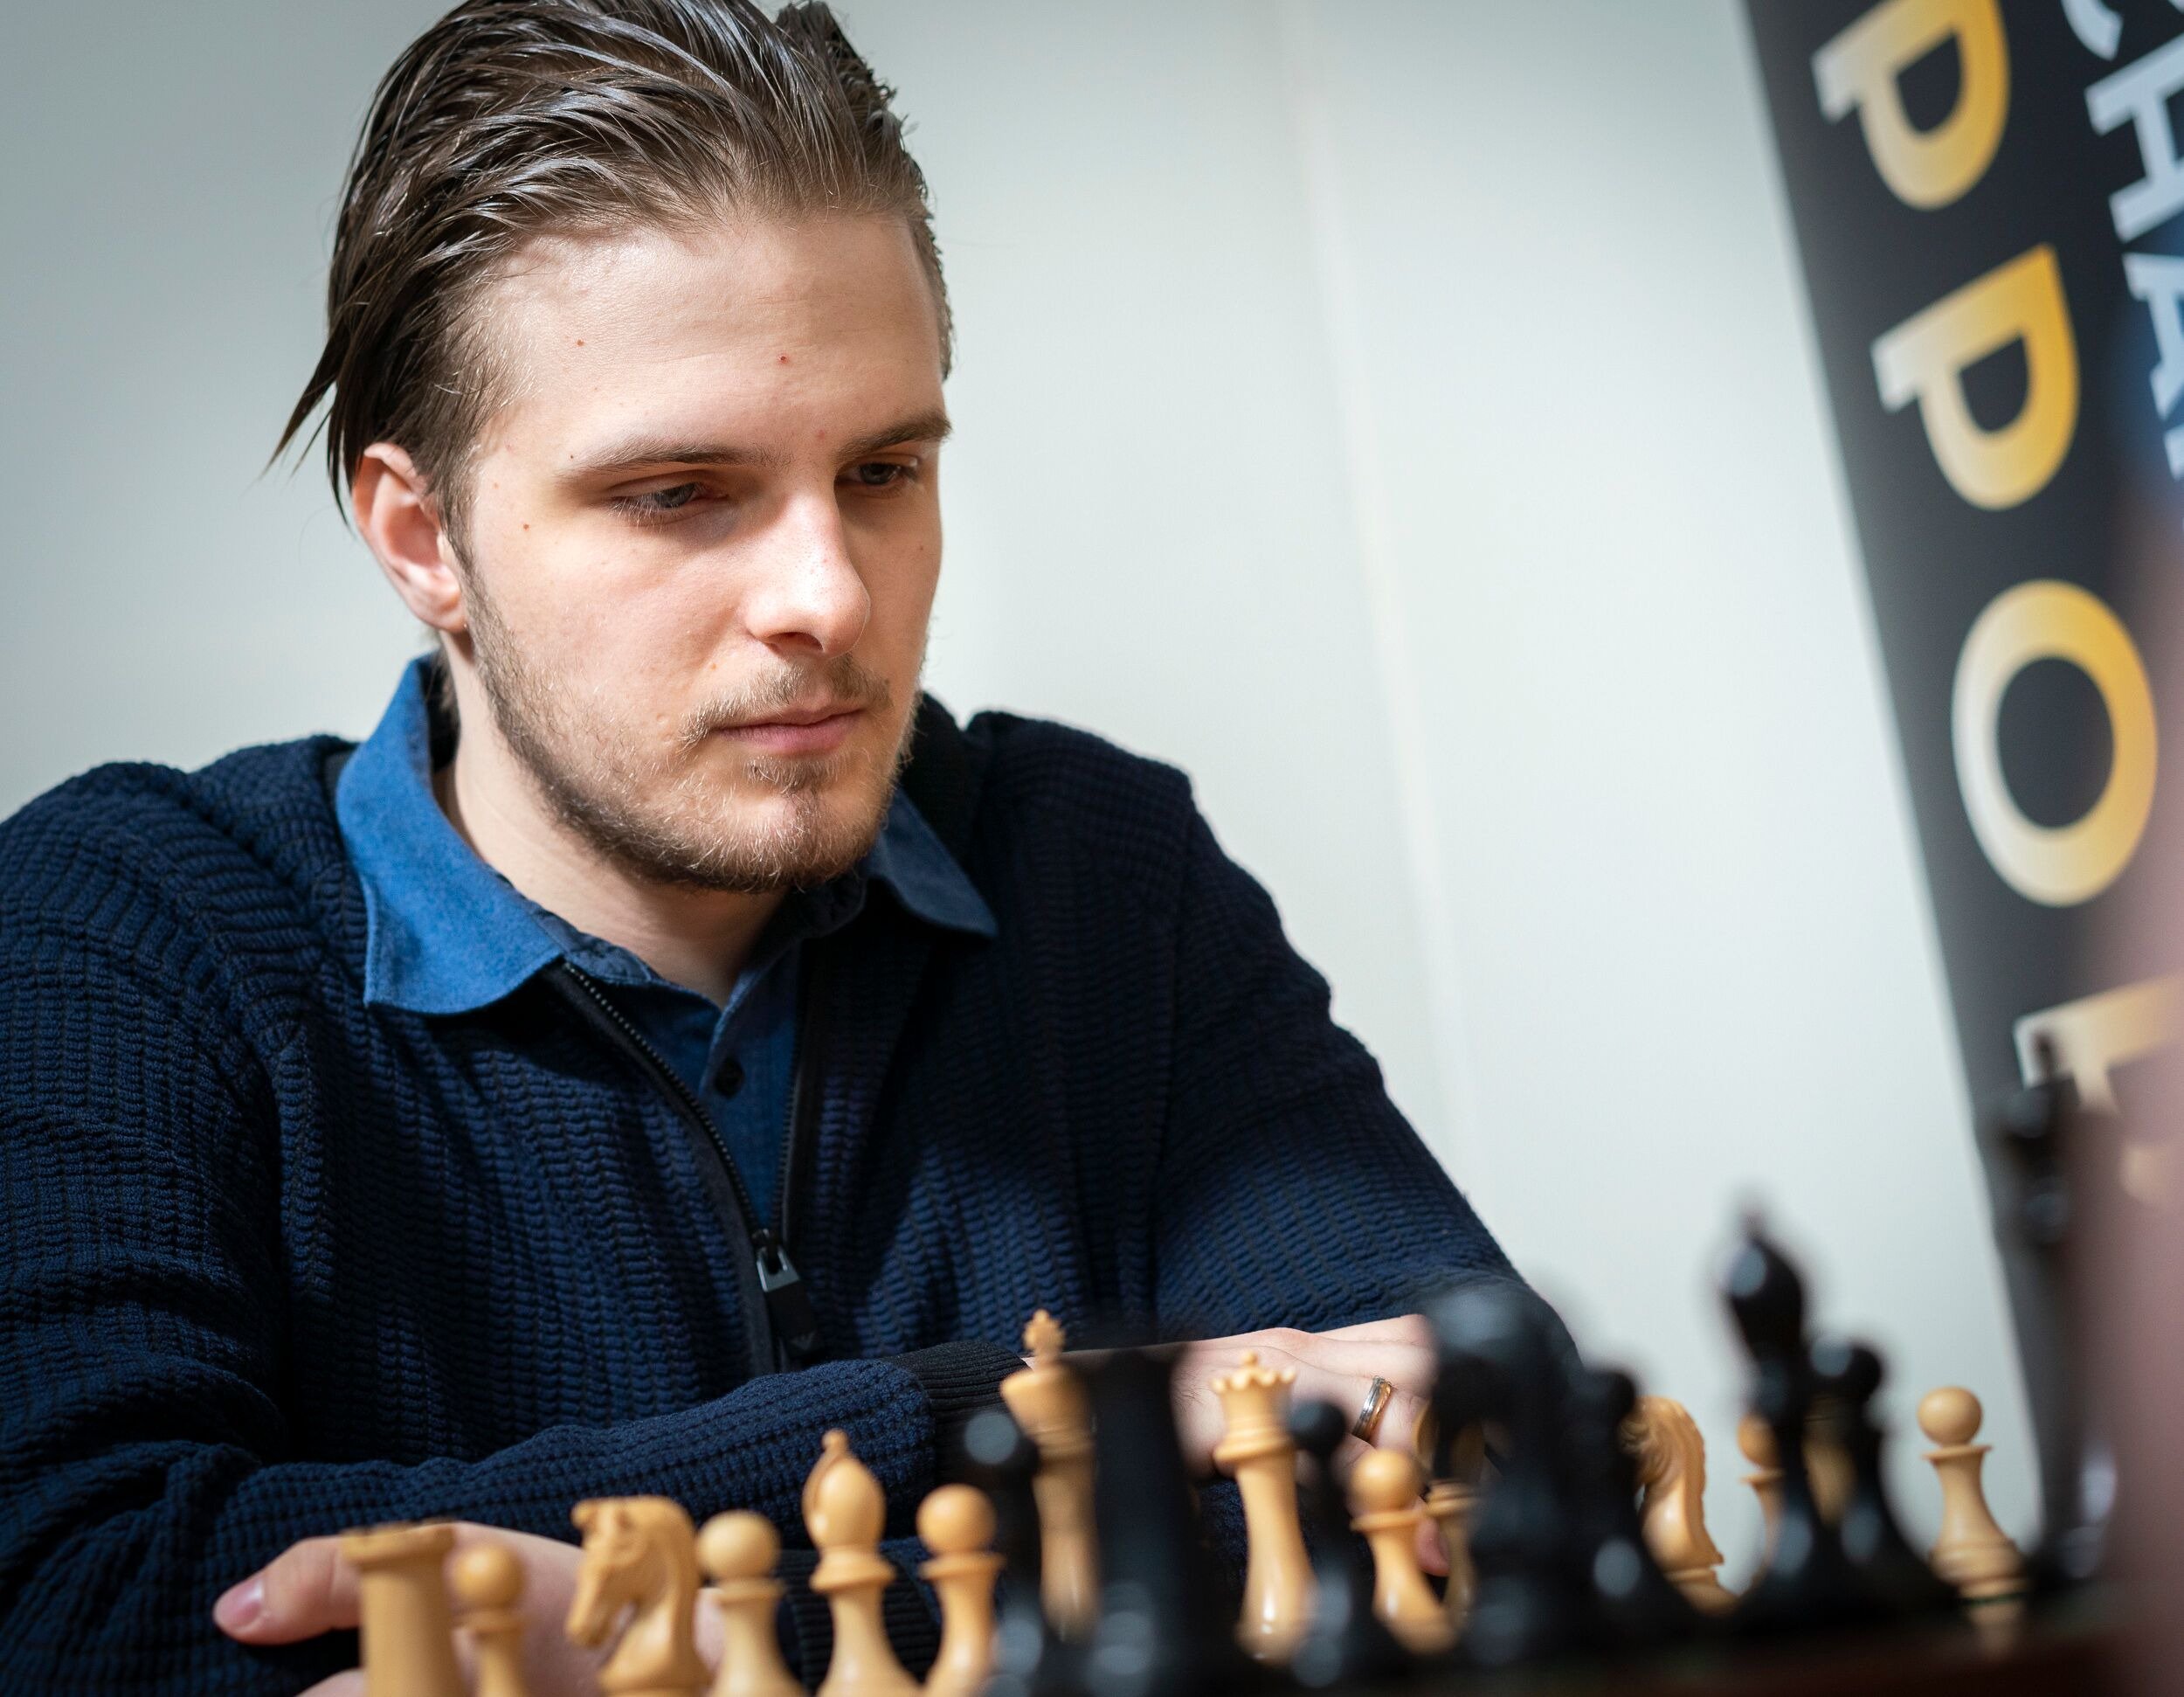 Saint Louis Chess Club on X: Richard Rapport can clinch the match